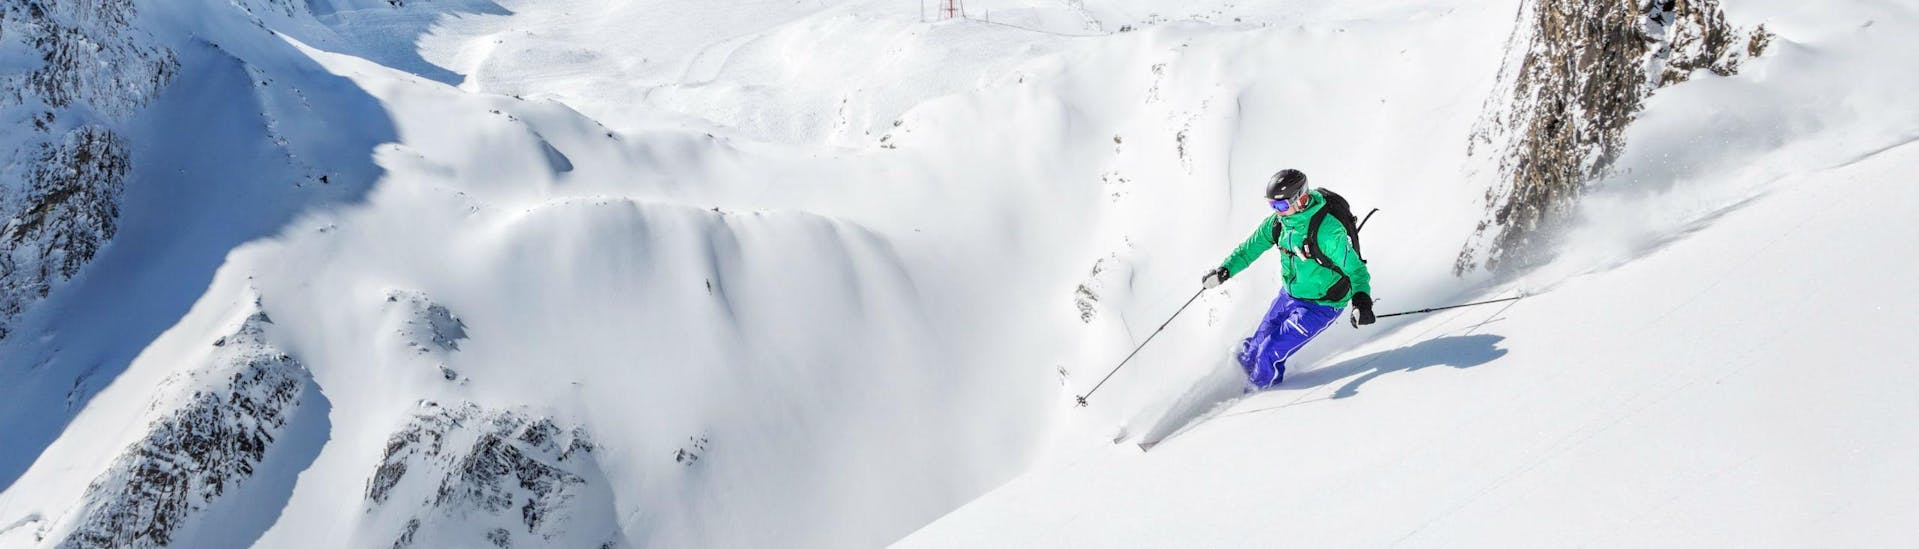 A skier is riding through some fresh powder snow in the Austrian ski resort of Kaprun, where beginners as well as advanced skiers can book ski lessons with the local ski schools.